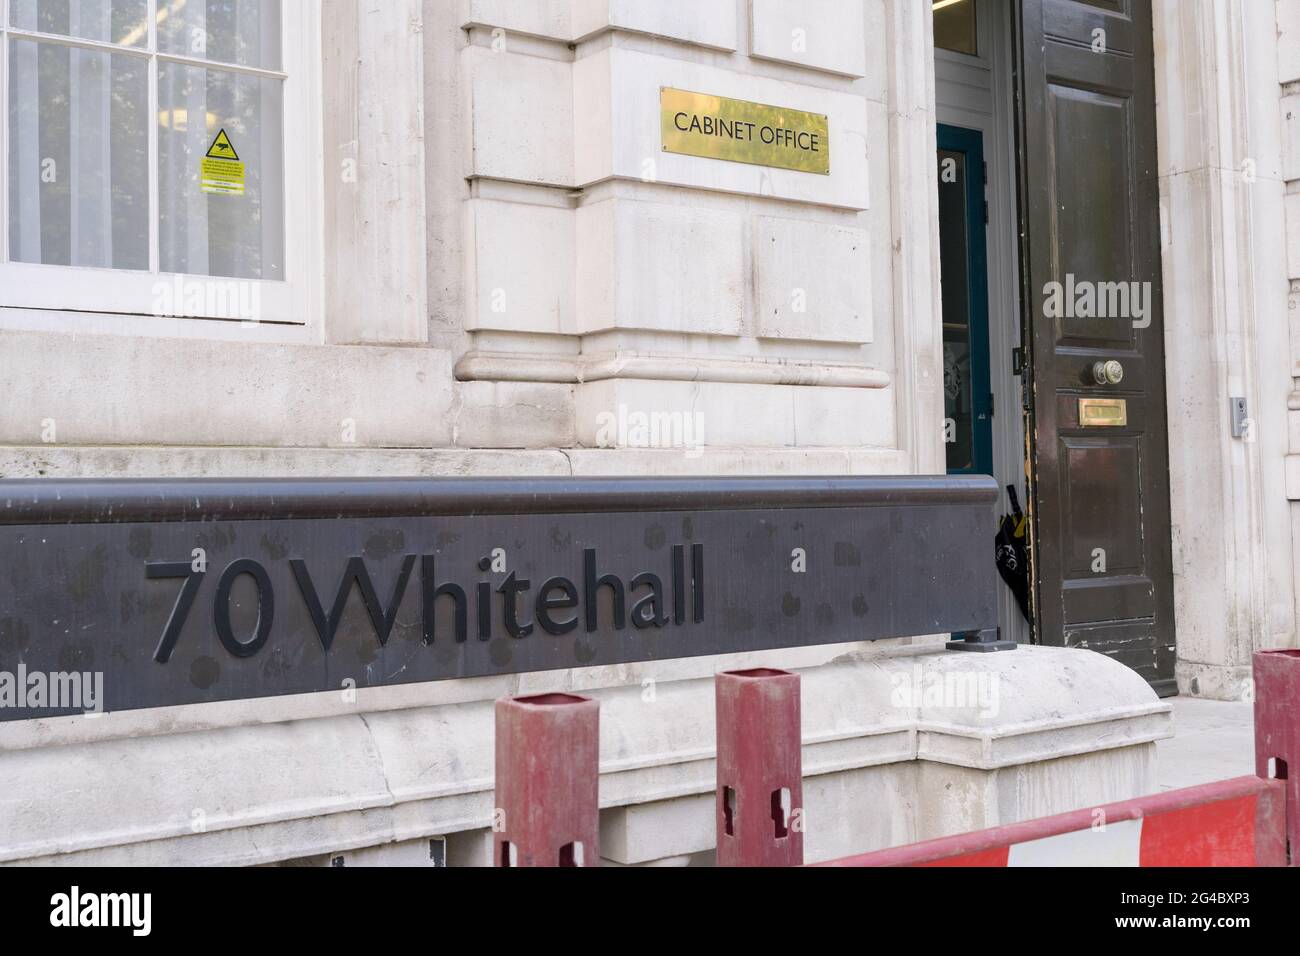 Entrance to  Cabinet Office, 70 Whitehall, Westminster city London, England, UK Stock Photo